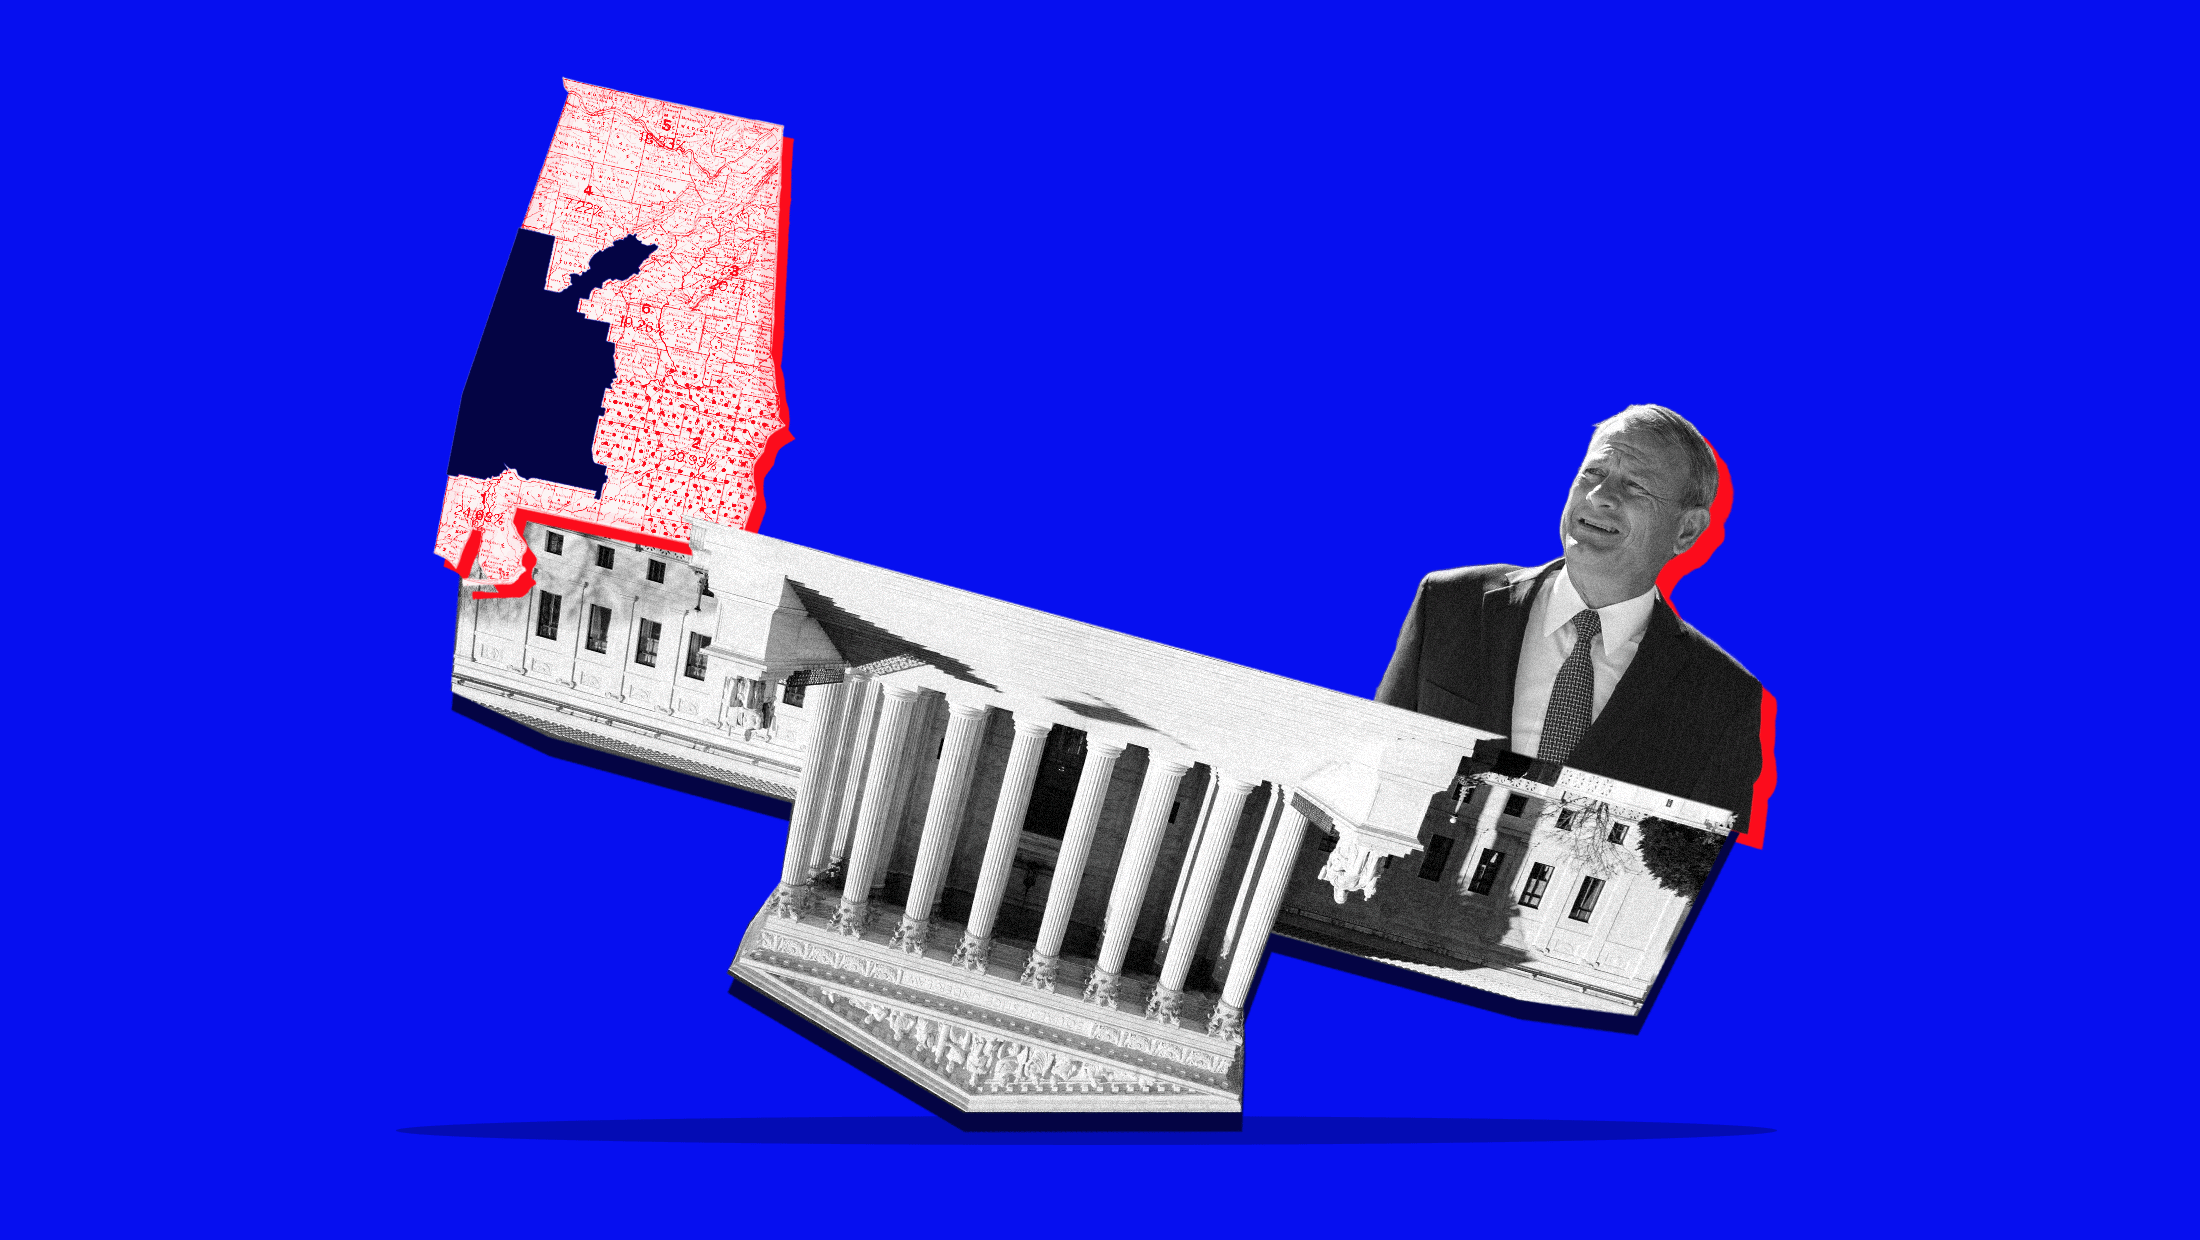 Blue background with image of U.S. Supreme Court upside down, a map of Alabama toned in red to the left and an image of Chief Justice John Roberts to the right.